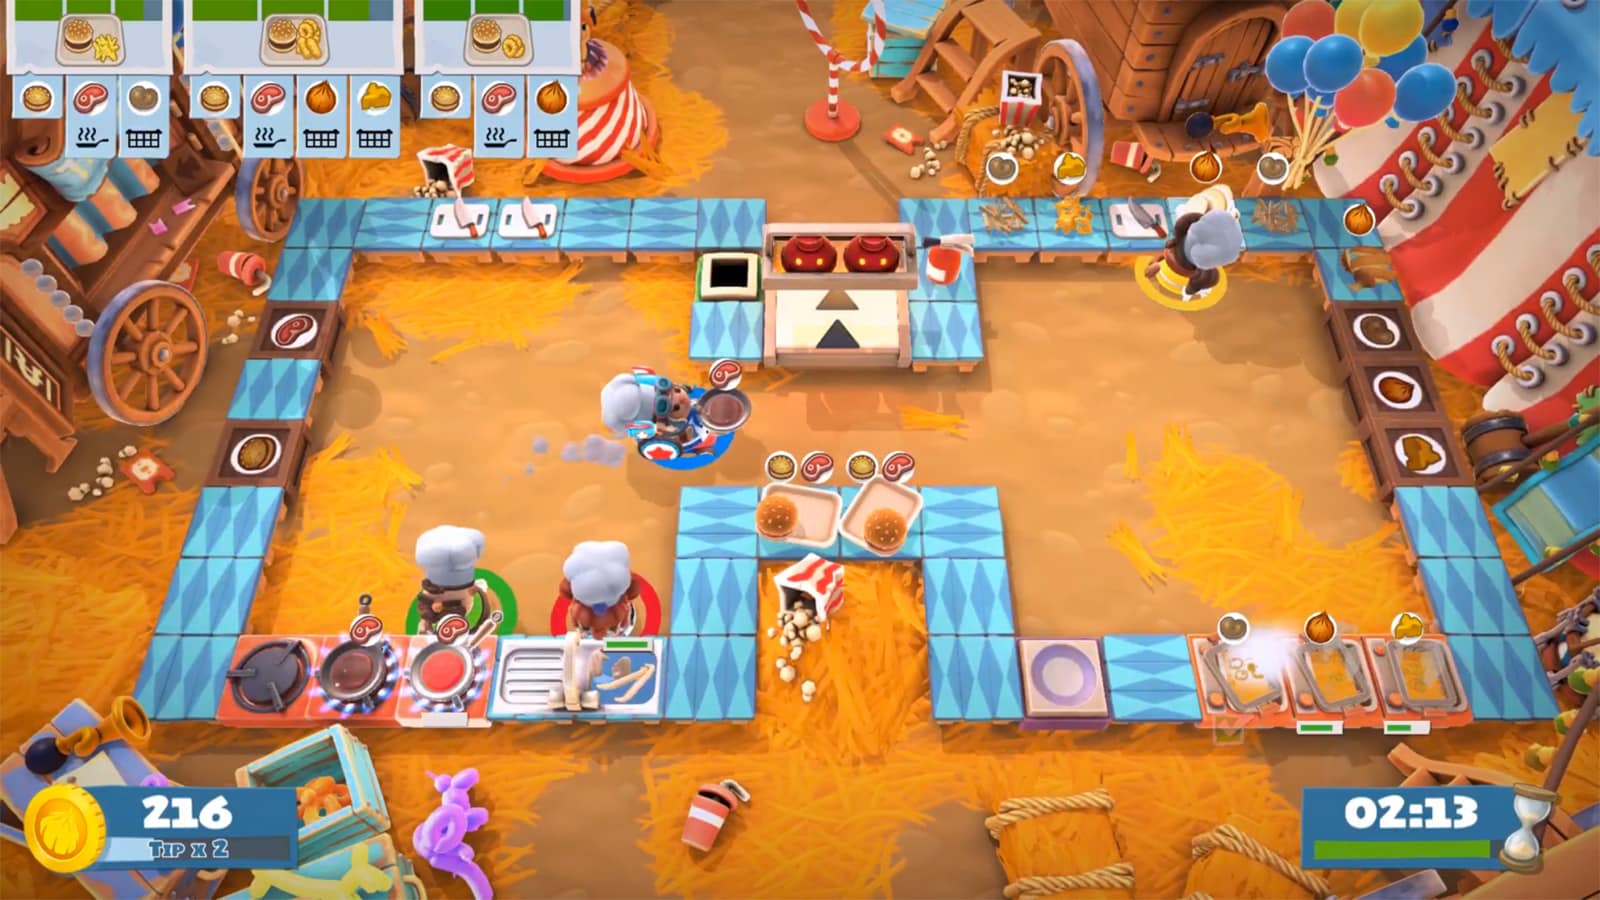 A screenshot from party game Overcooked 2 on Switch